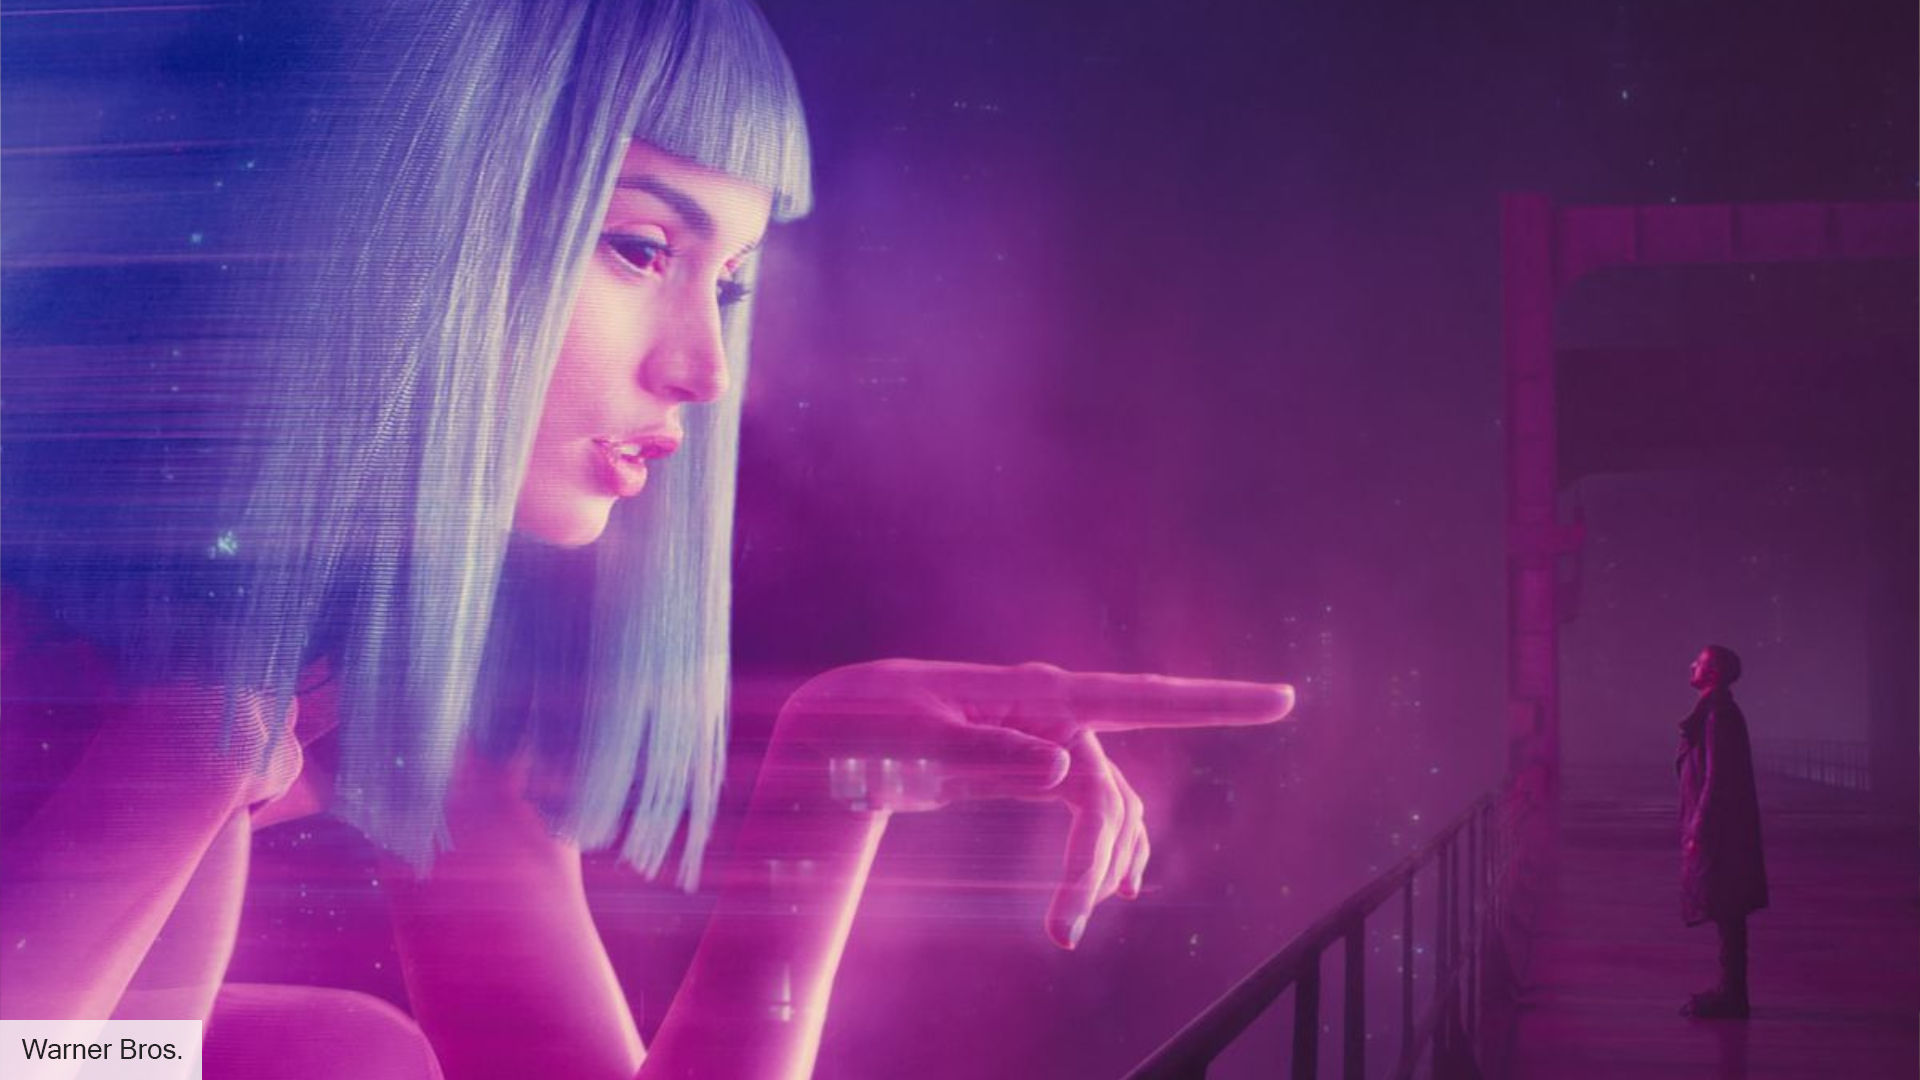 The best science-fiction movies: Ryan gosling and Ana De Armas in Blade Runner 2049